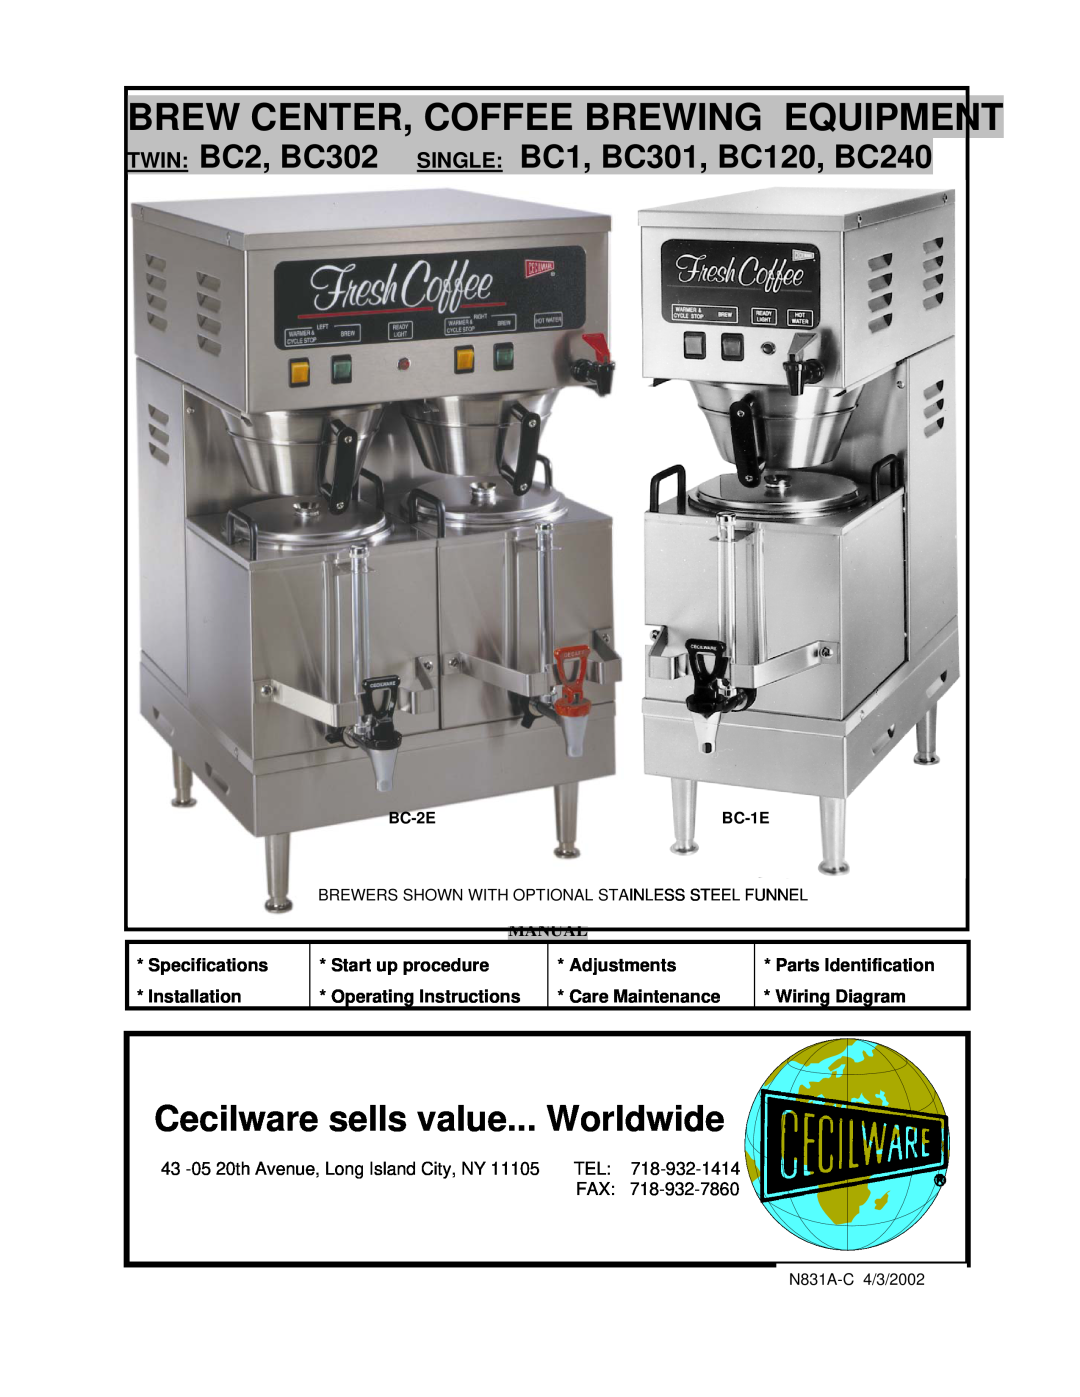 Cecilware BC301 specifications Cecilware sells value... Worldwide, Brew Center, Coffee Brewing Equipment, Manual, BC-2E 